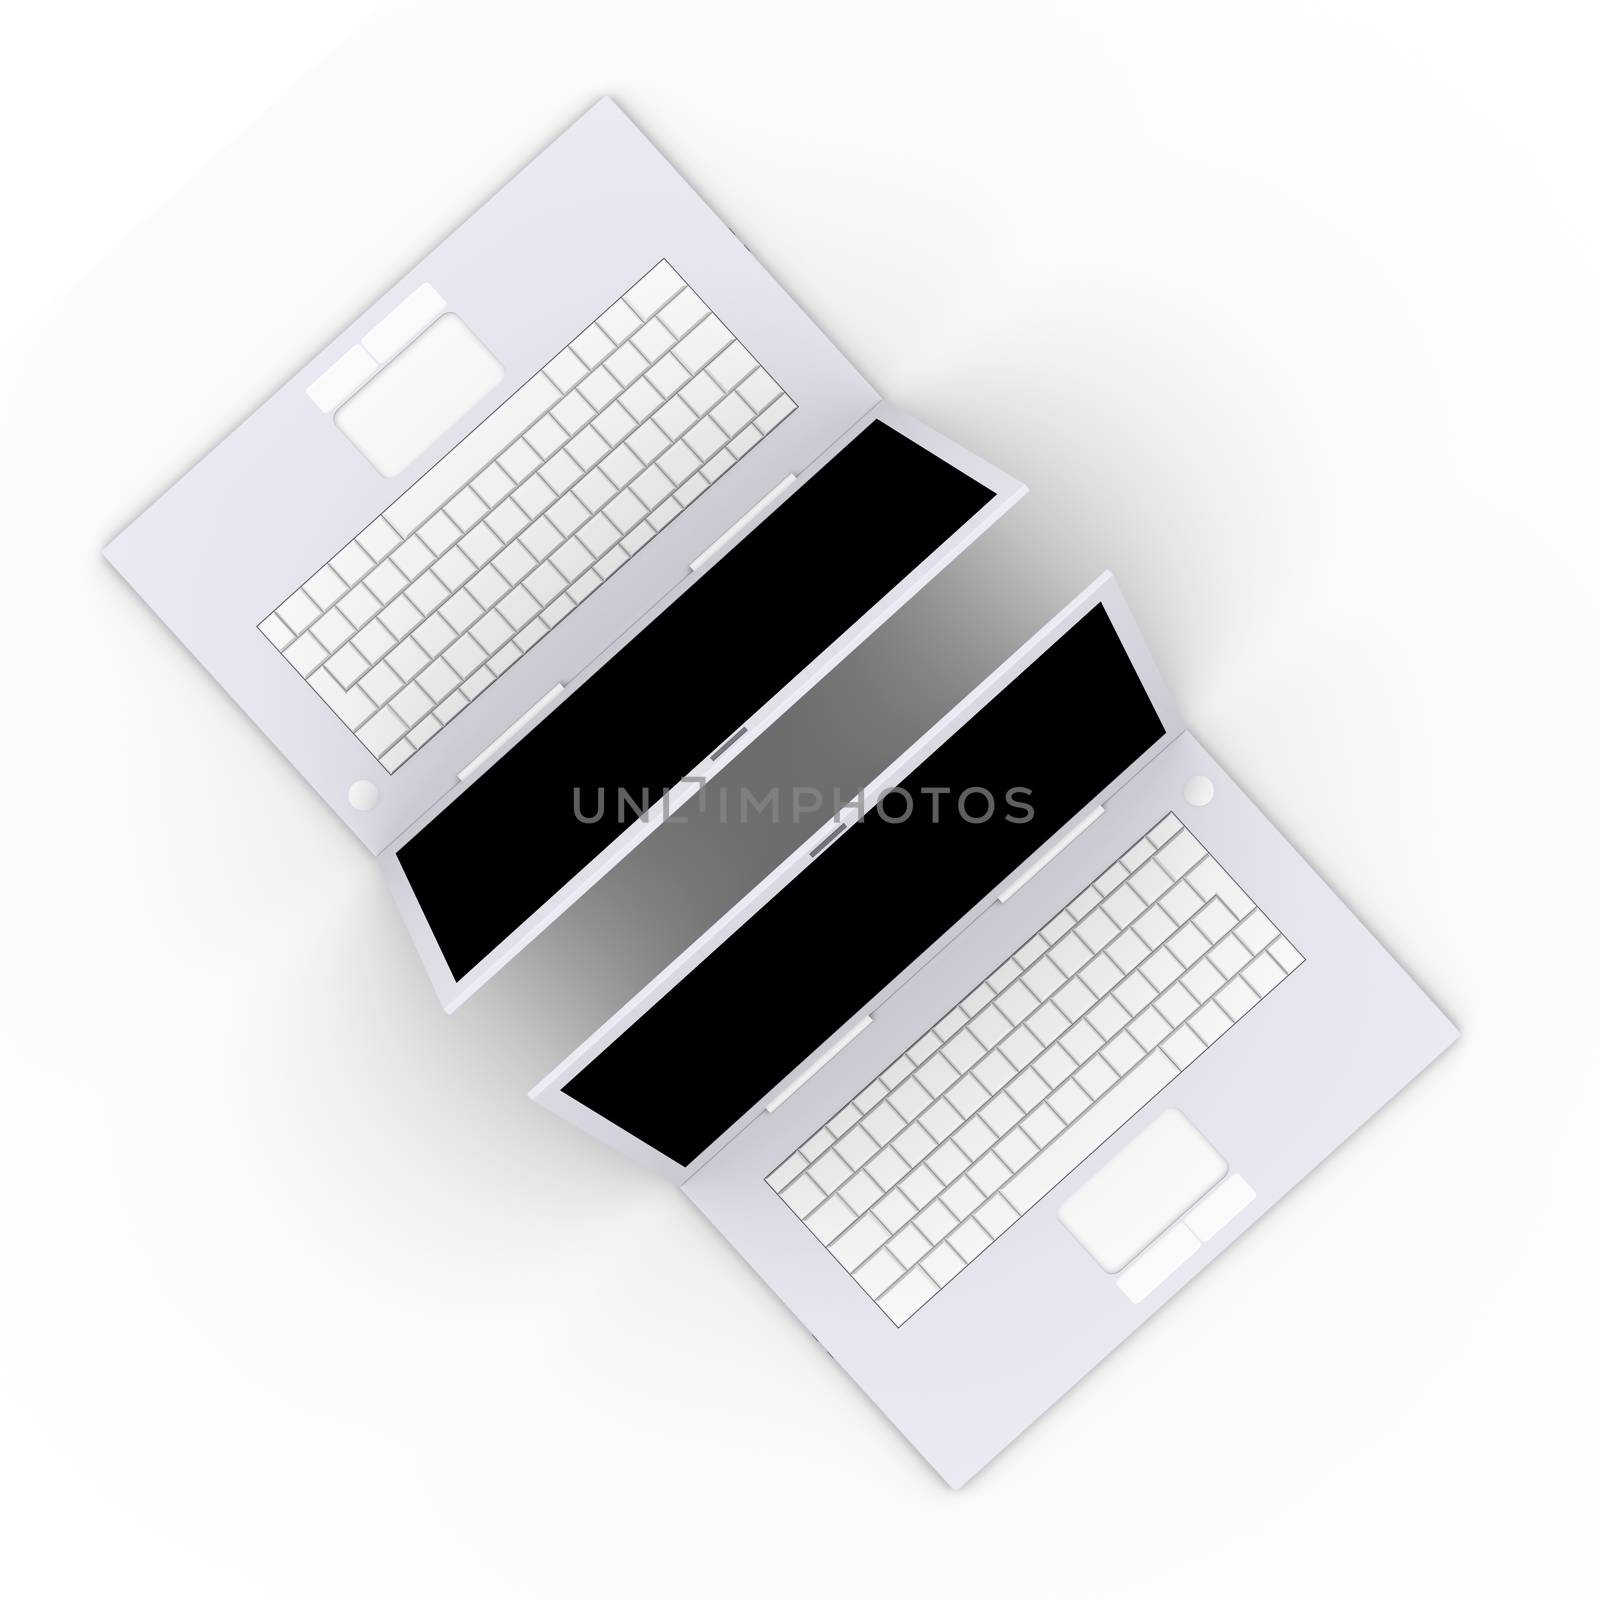 Two Laptops by Spectral